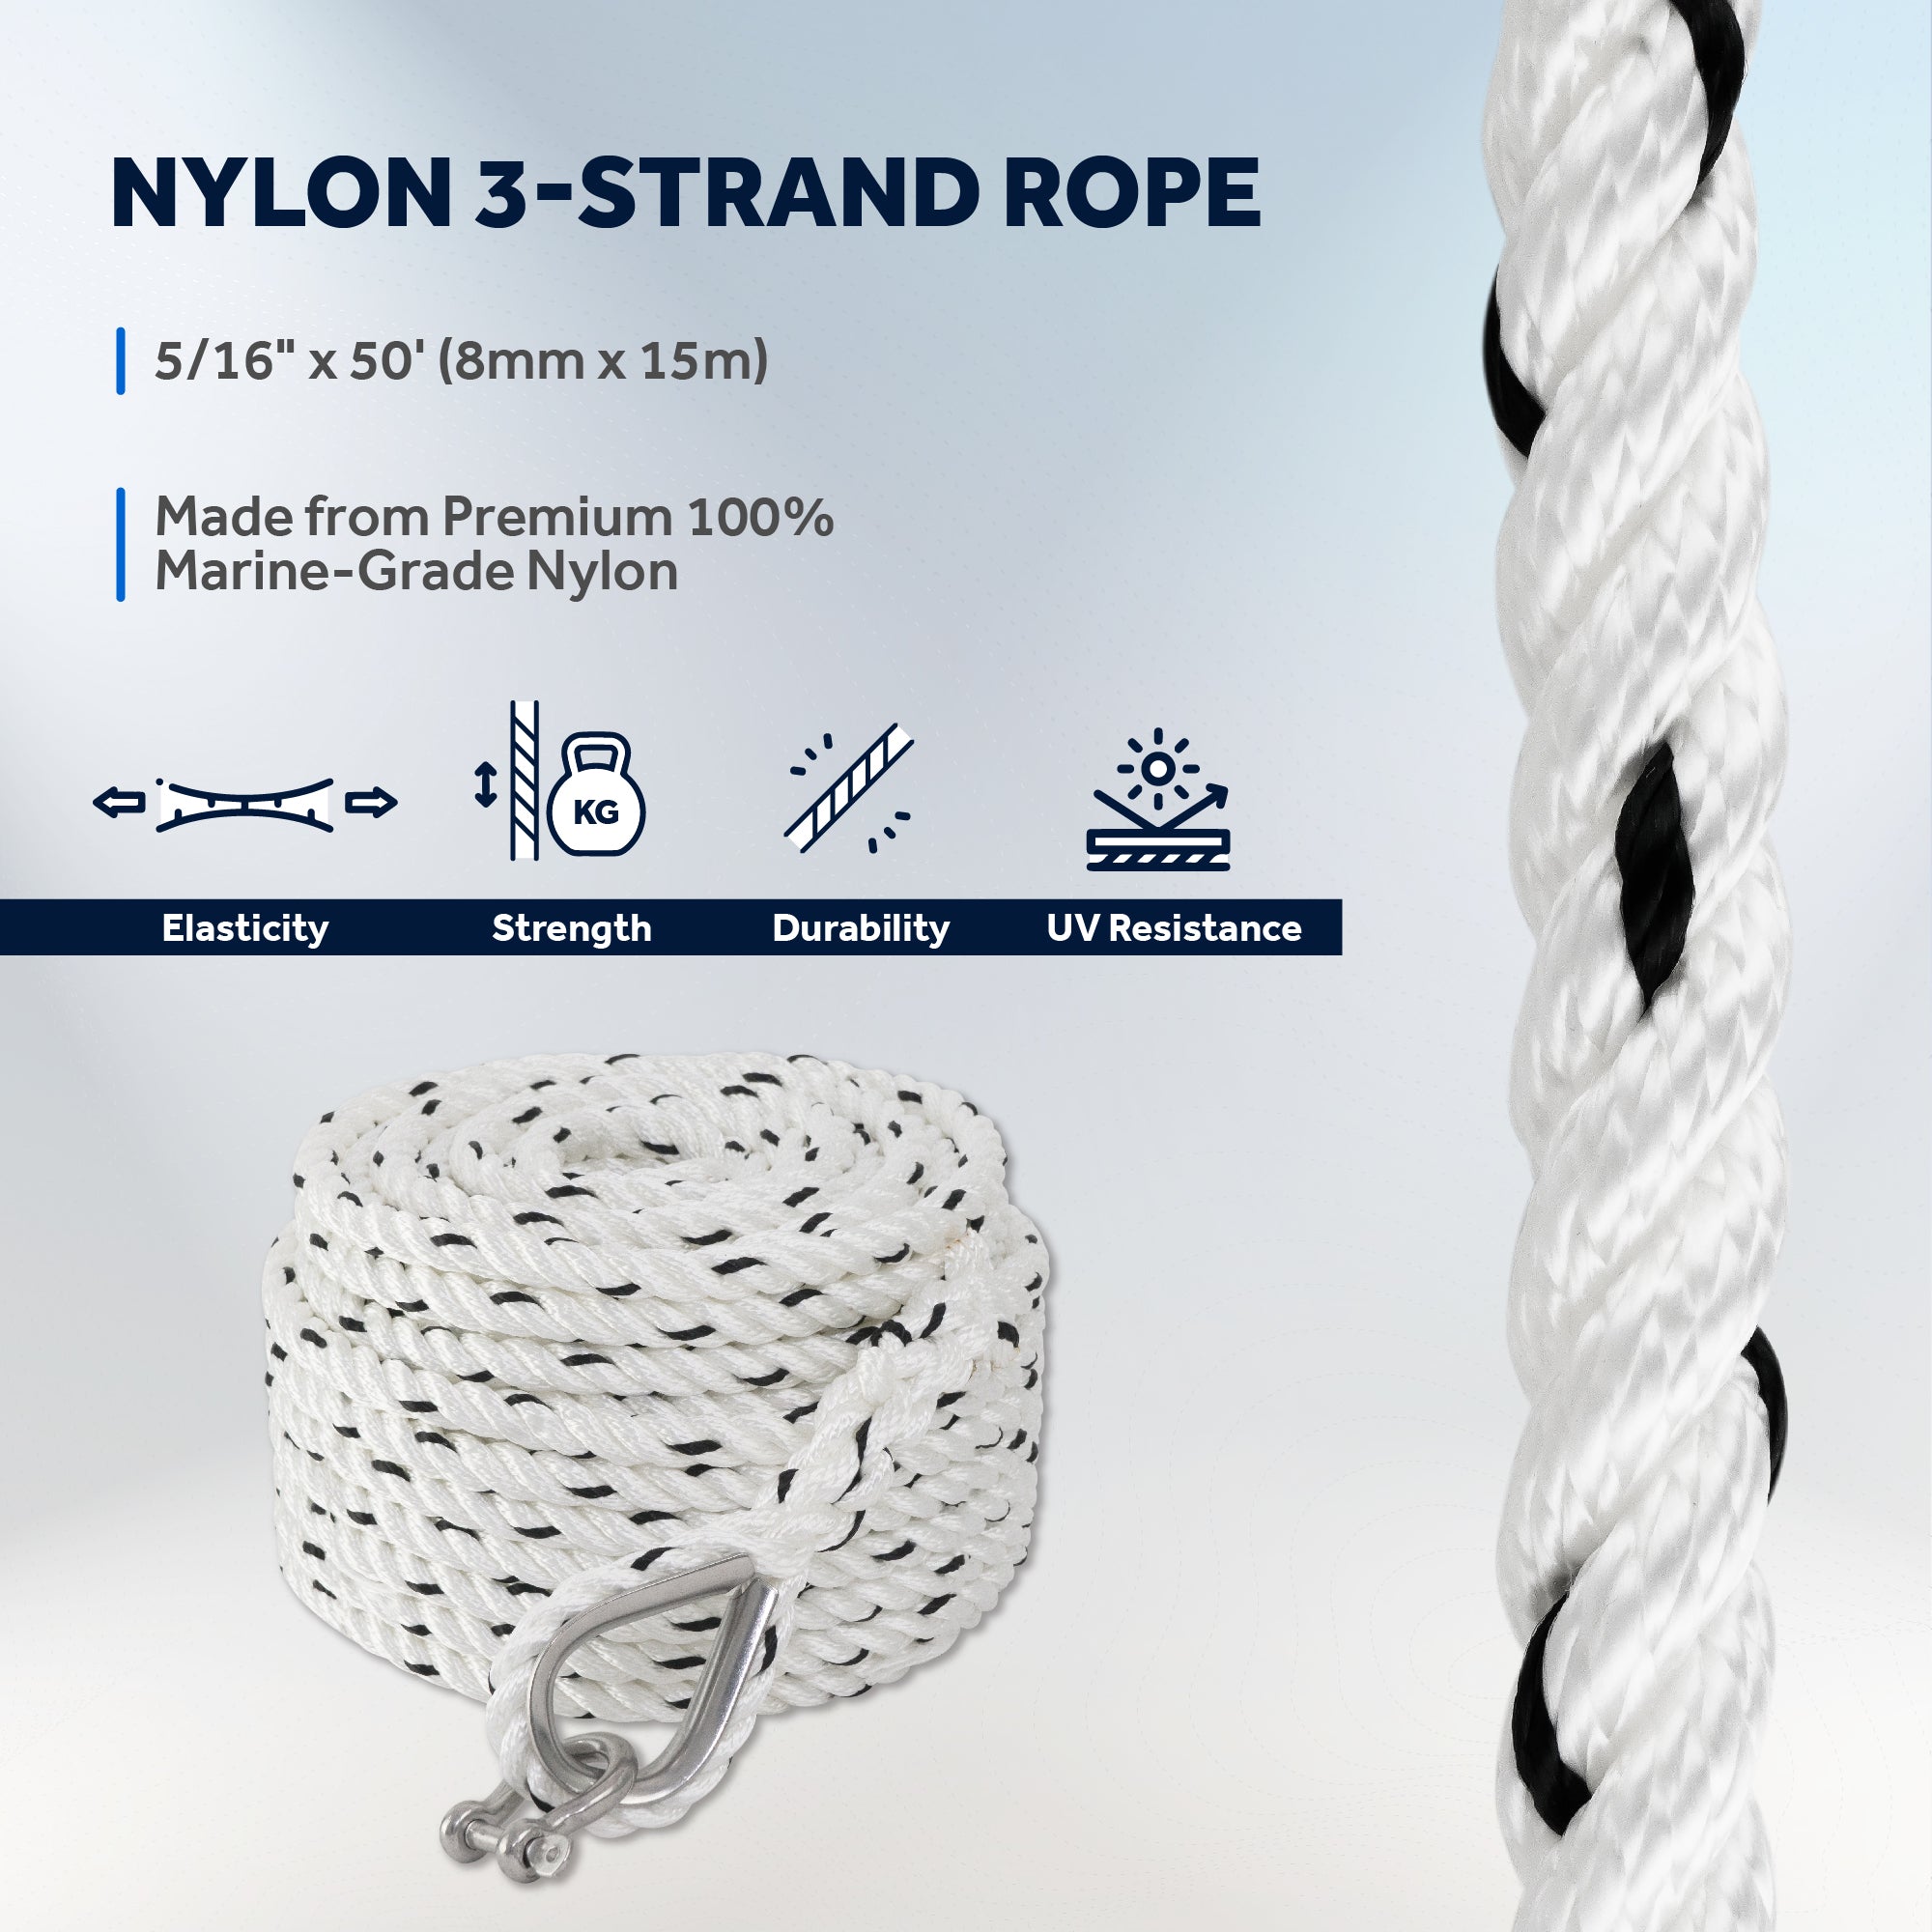 Anchor Rode, 5/16" x 50' Nylon 3-Strand Rope, 1/4" x 2' Hot Dipped Galvanized Steel Chain - FO4565